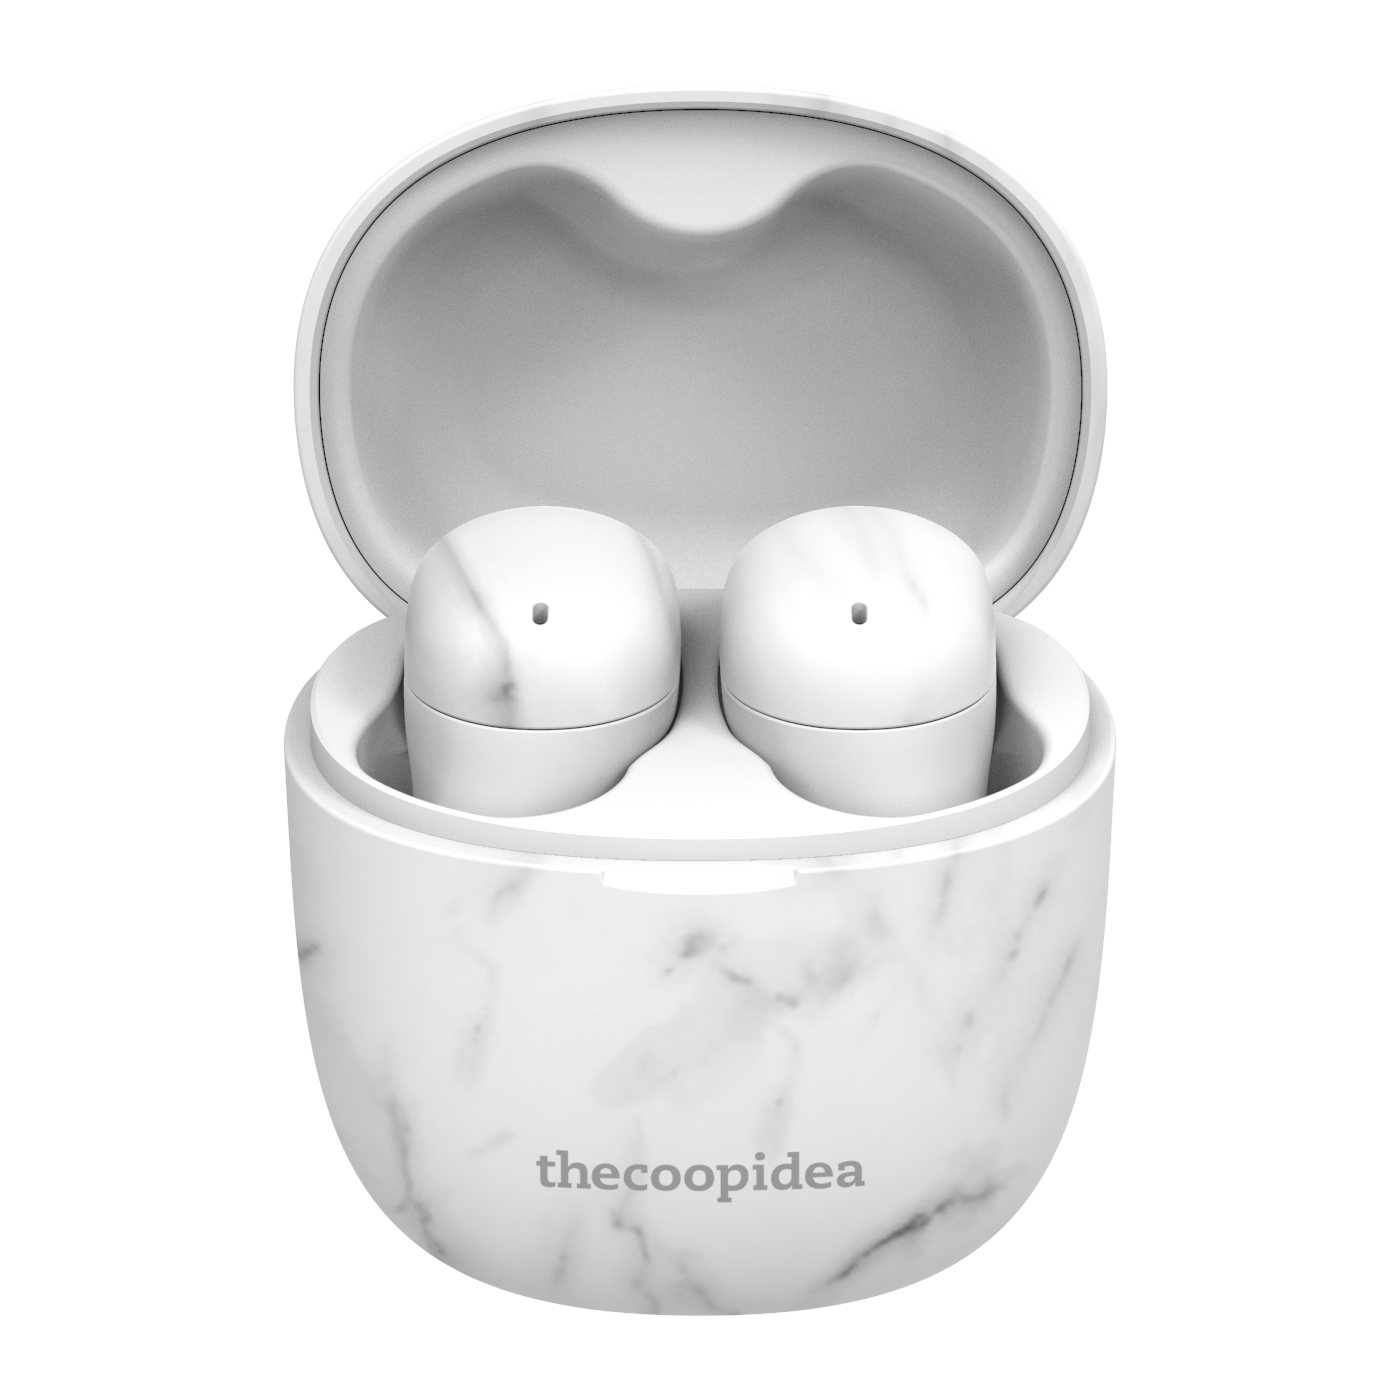 thecoopidea BEANS AIR True Wireless Earbuds - WhiteMarble